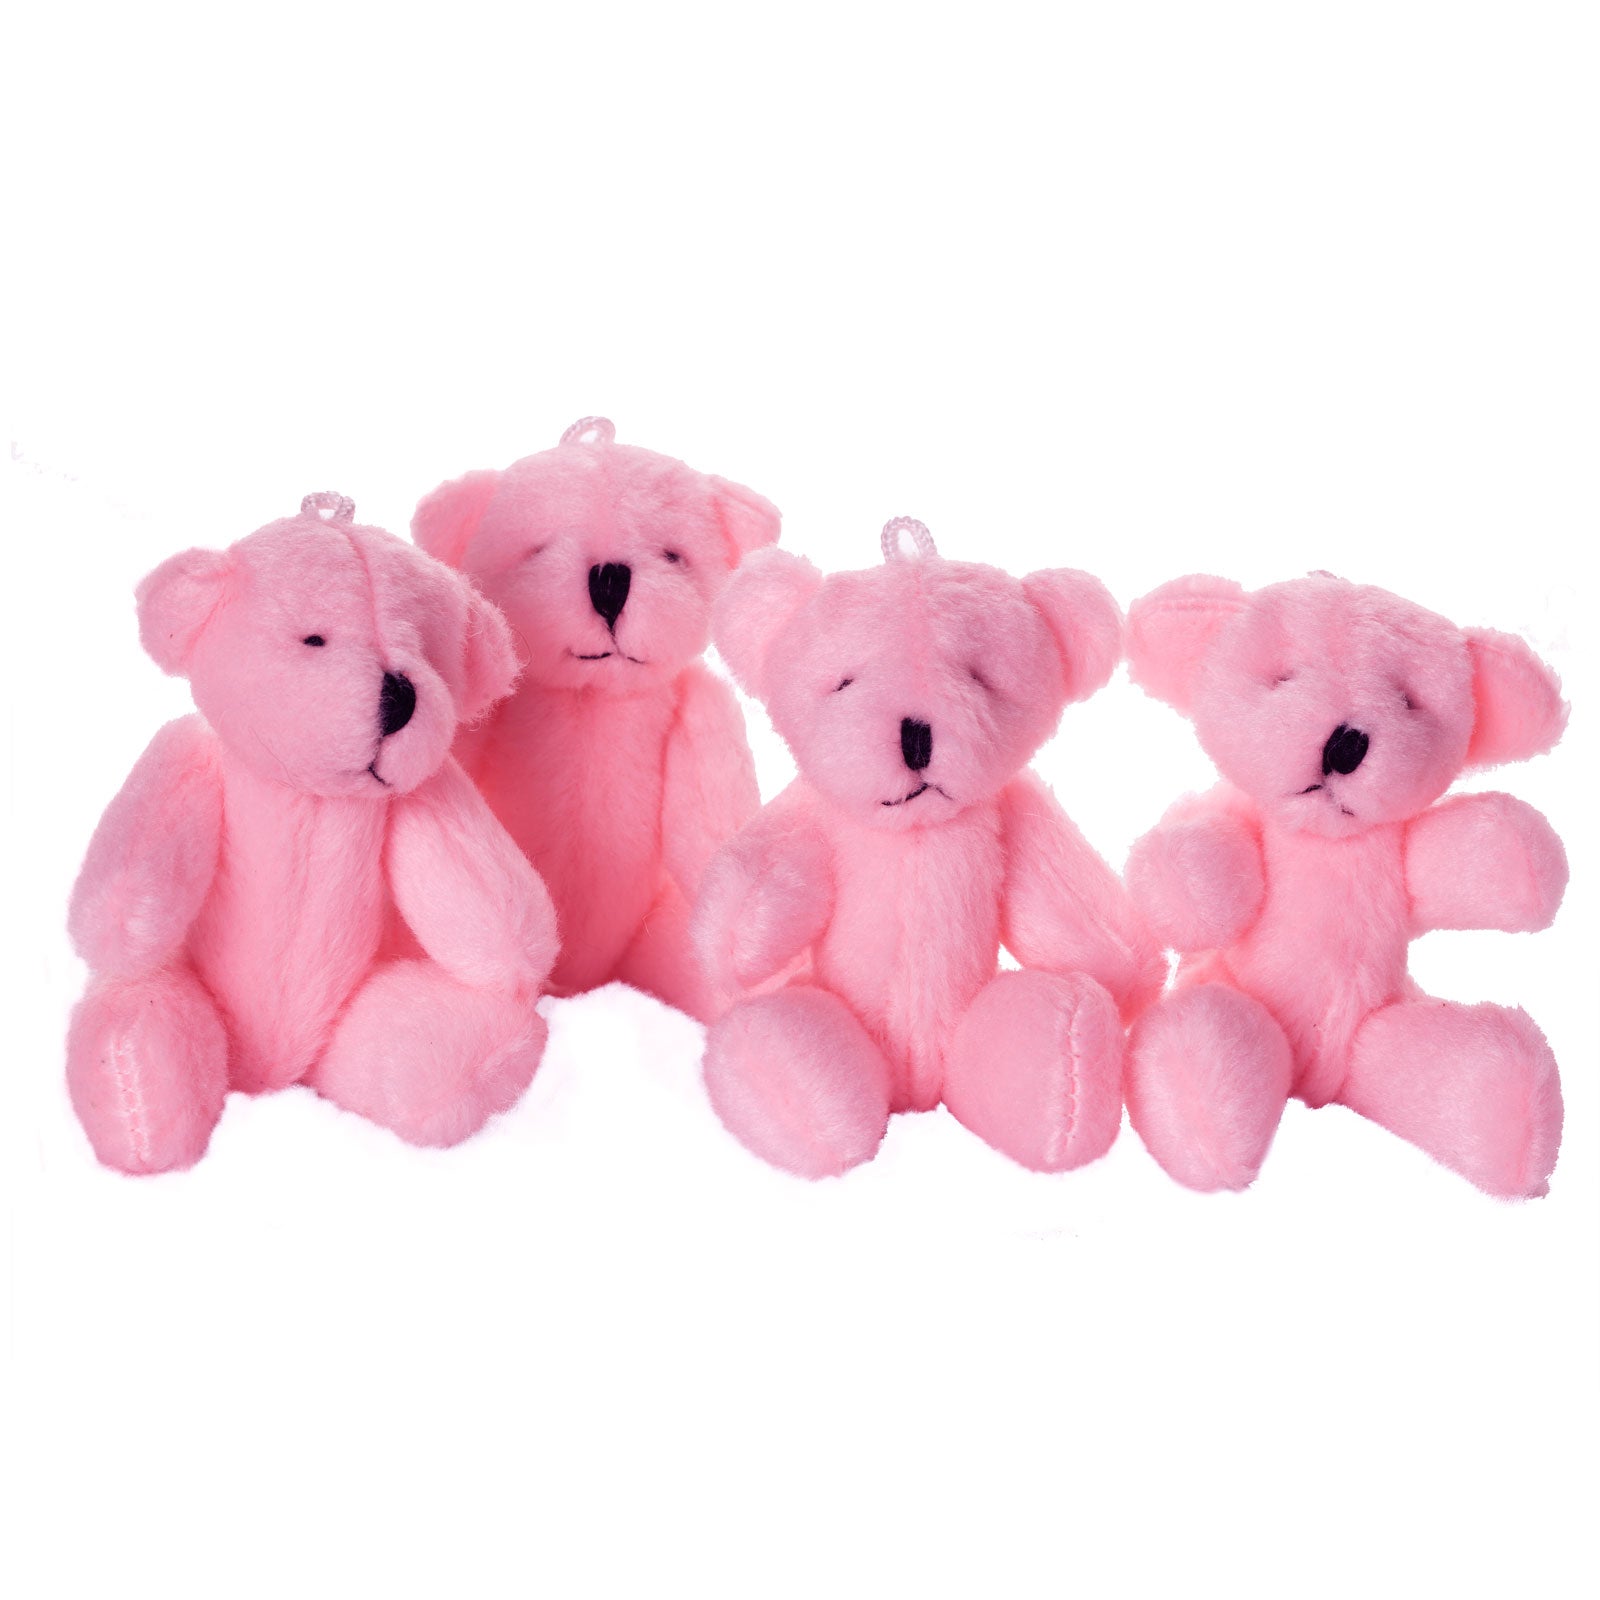 Small PINK Teddy Bears X 70 - Cute Soft Adorable